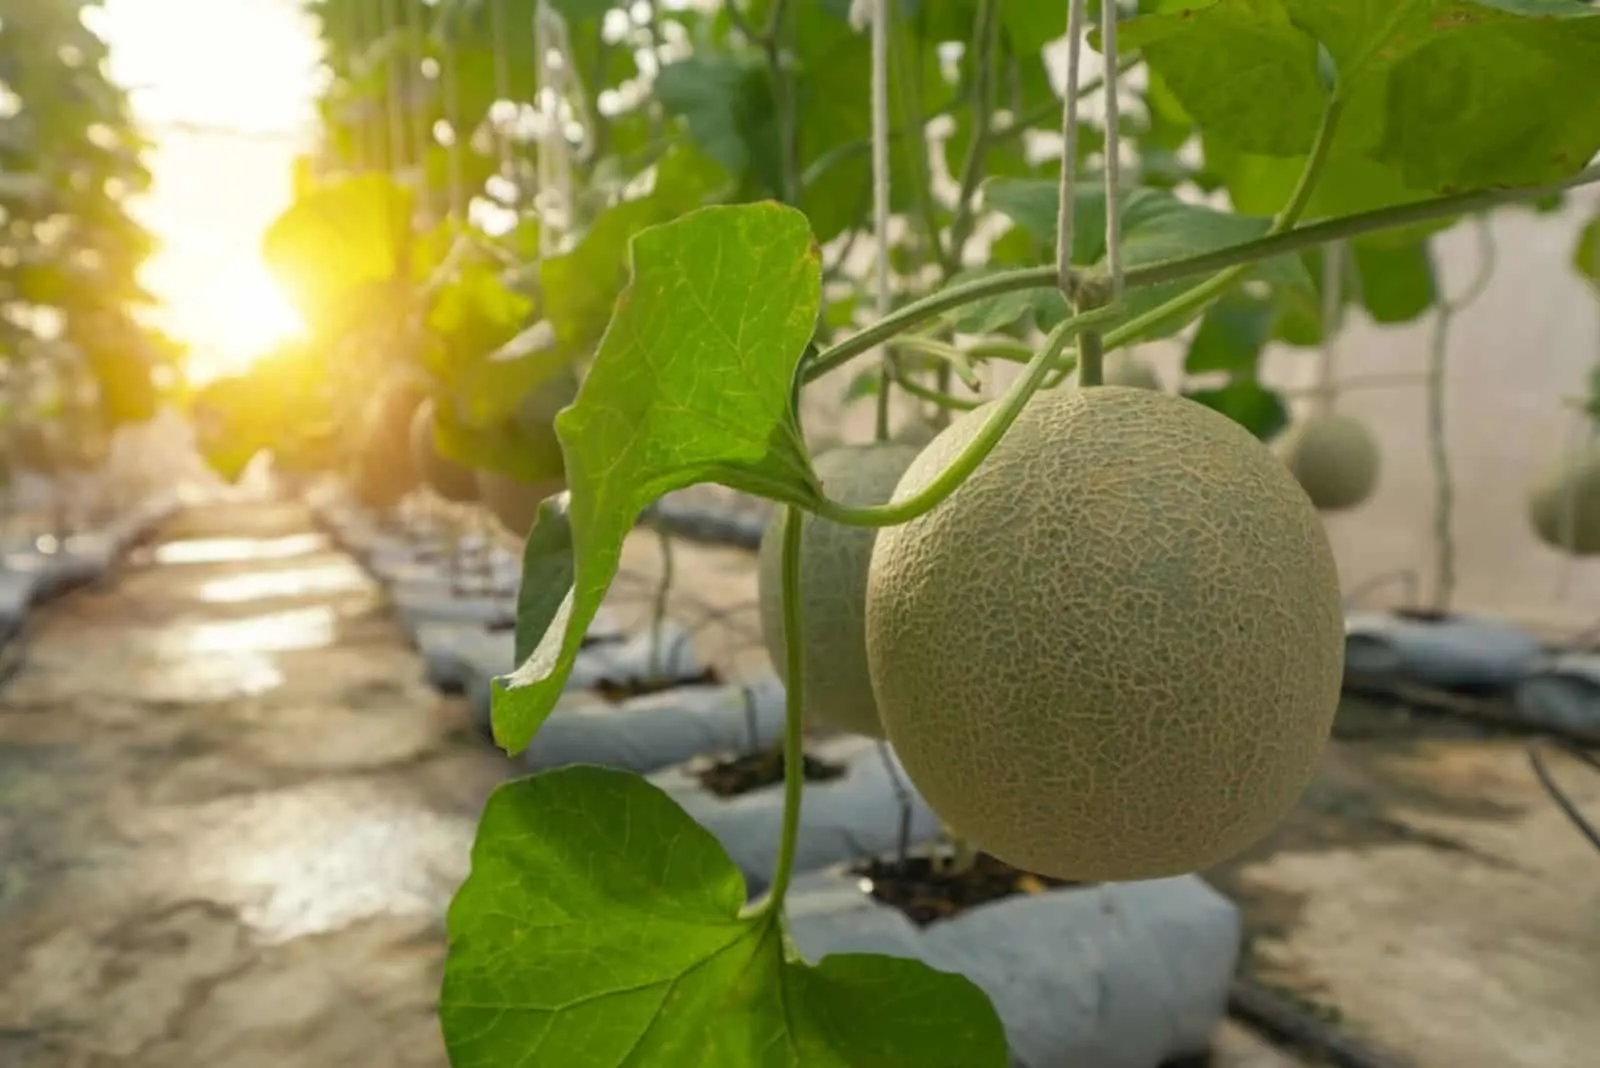 Growing fresh melon or cantaloupe in greenhouse farm